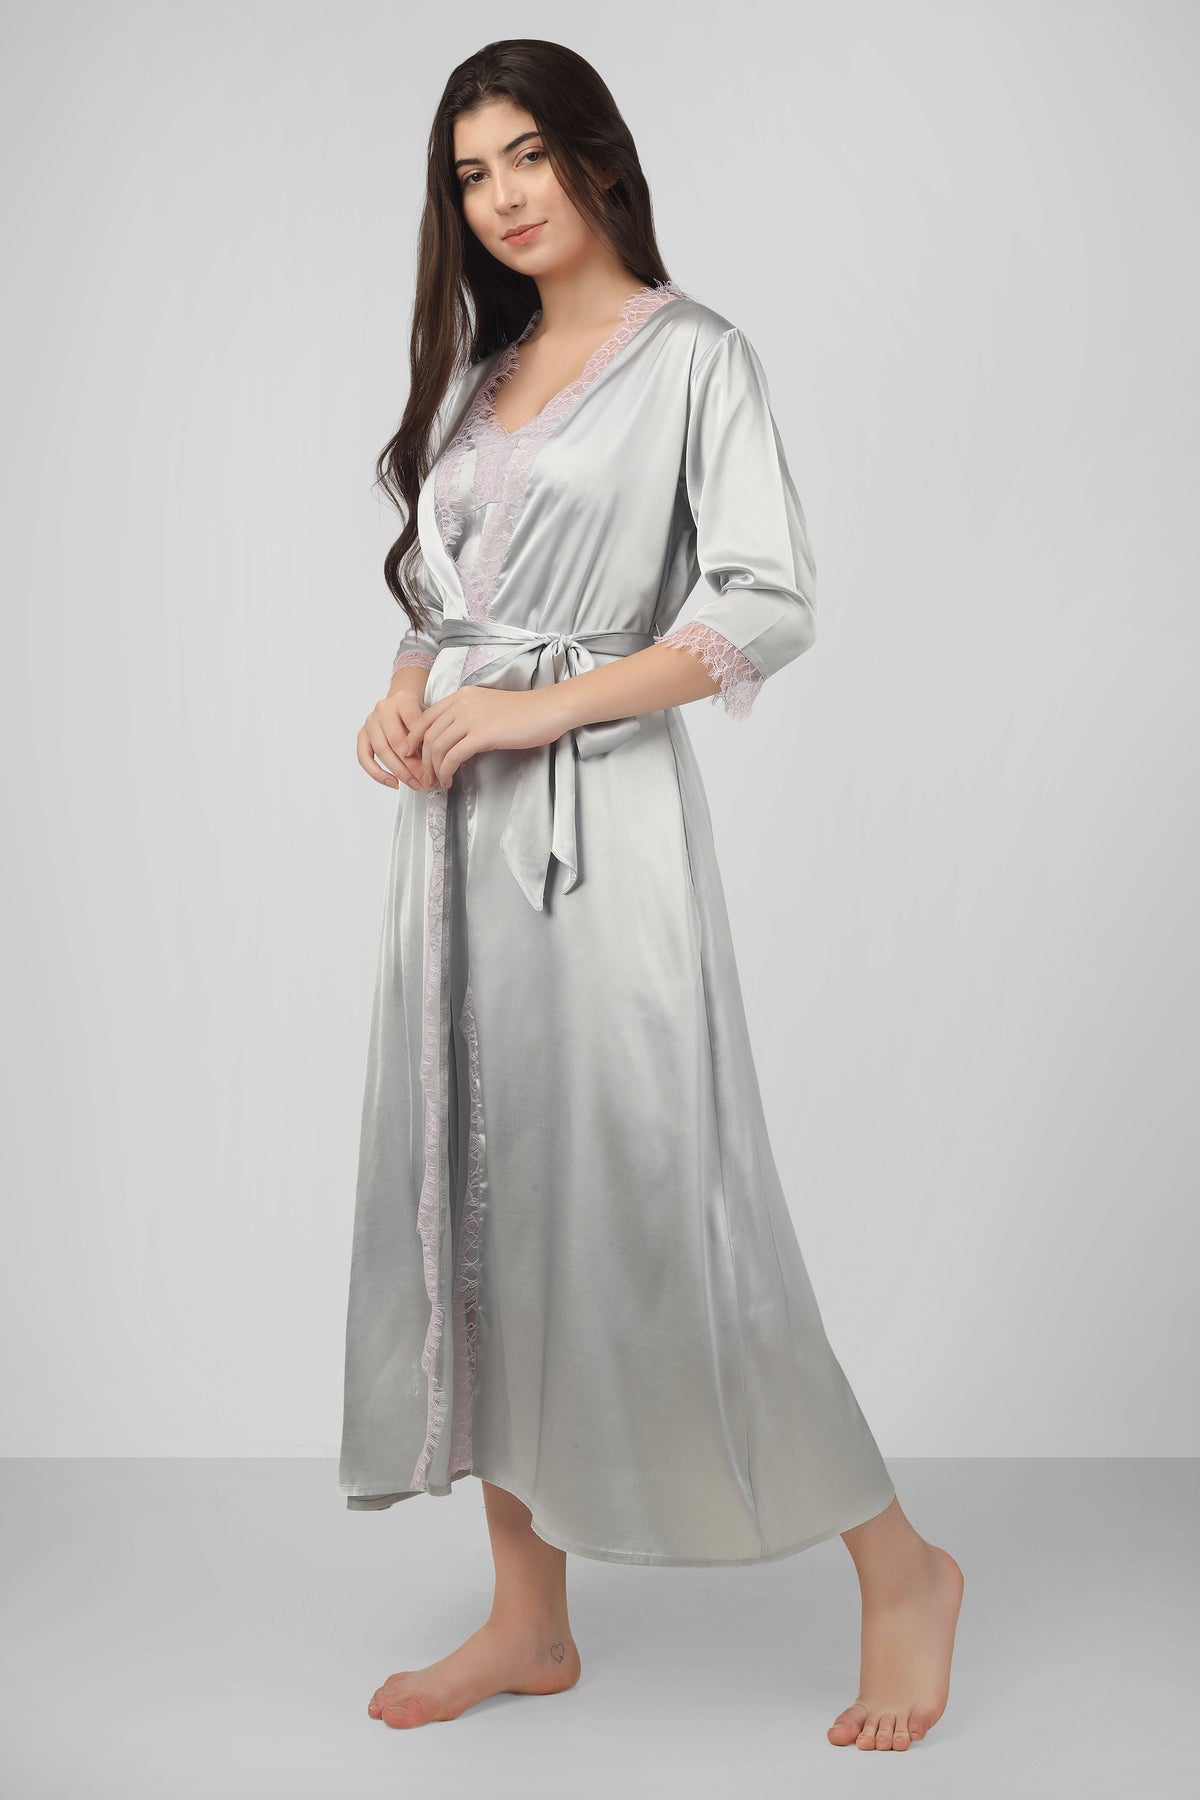 Ace, Nightdress & Gown